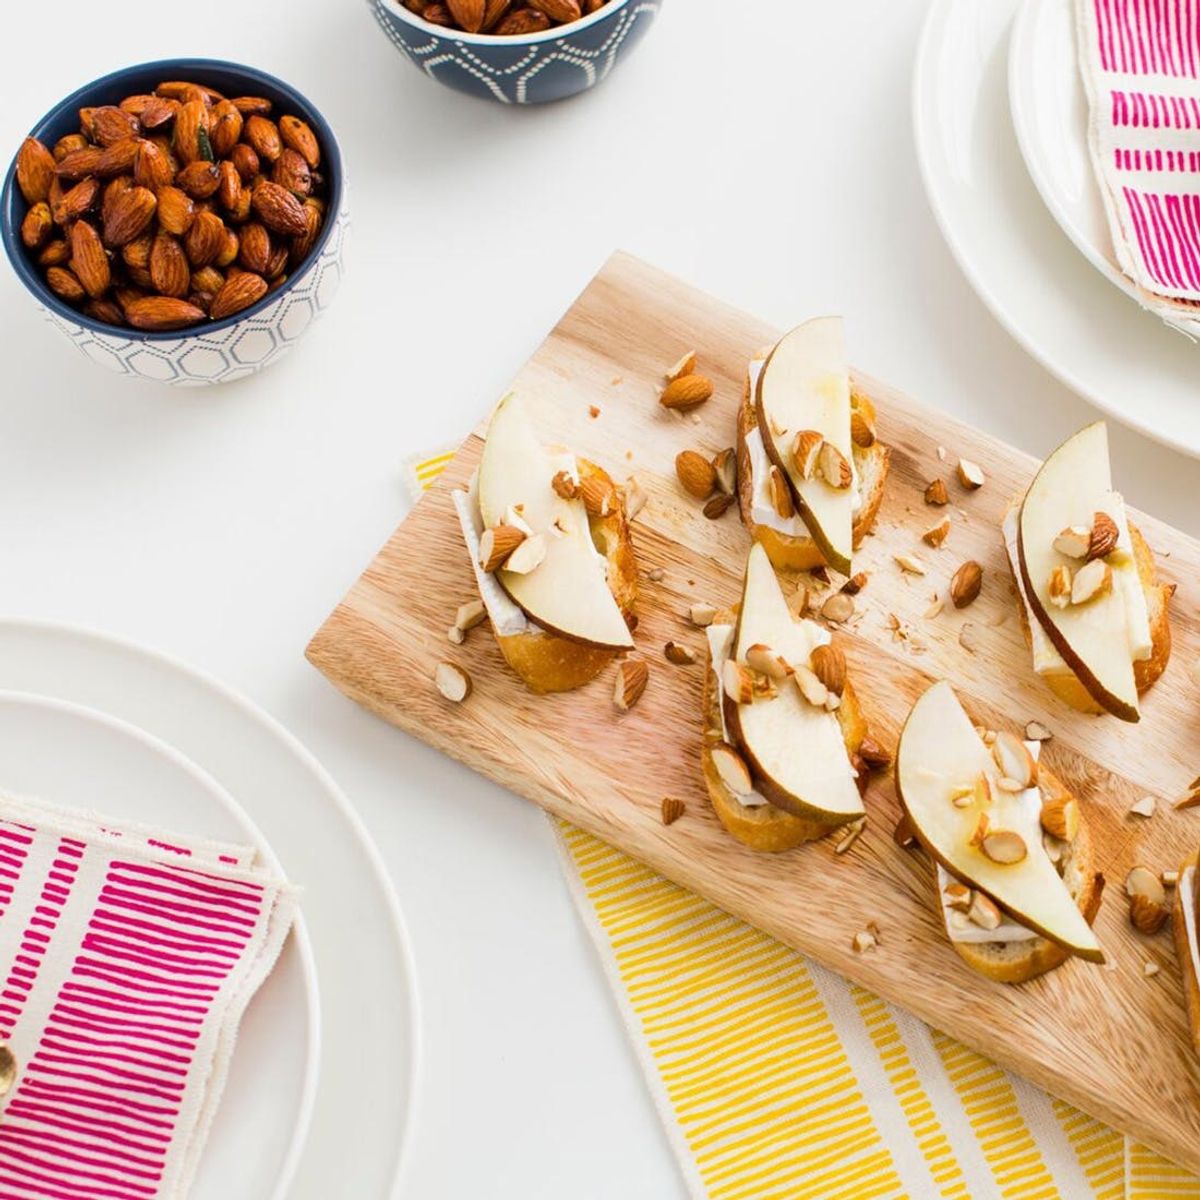 Get the Party Started! 2 Hostess Snacks to Make This Holiday Season